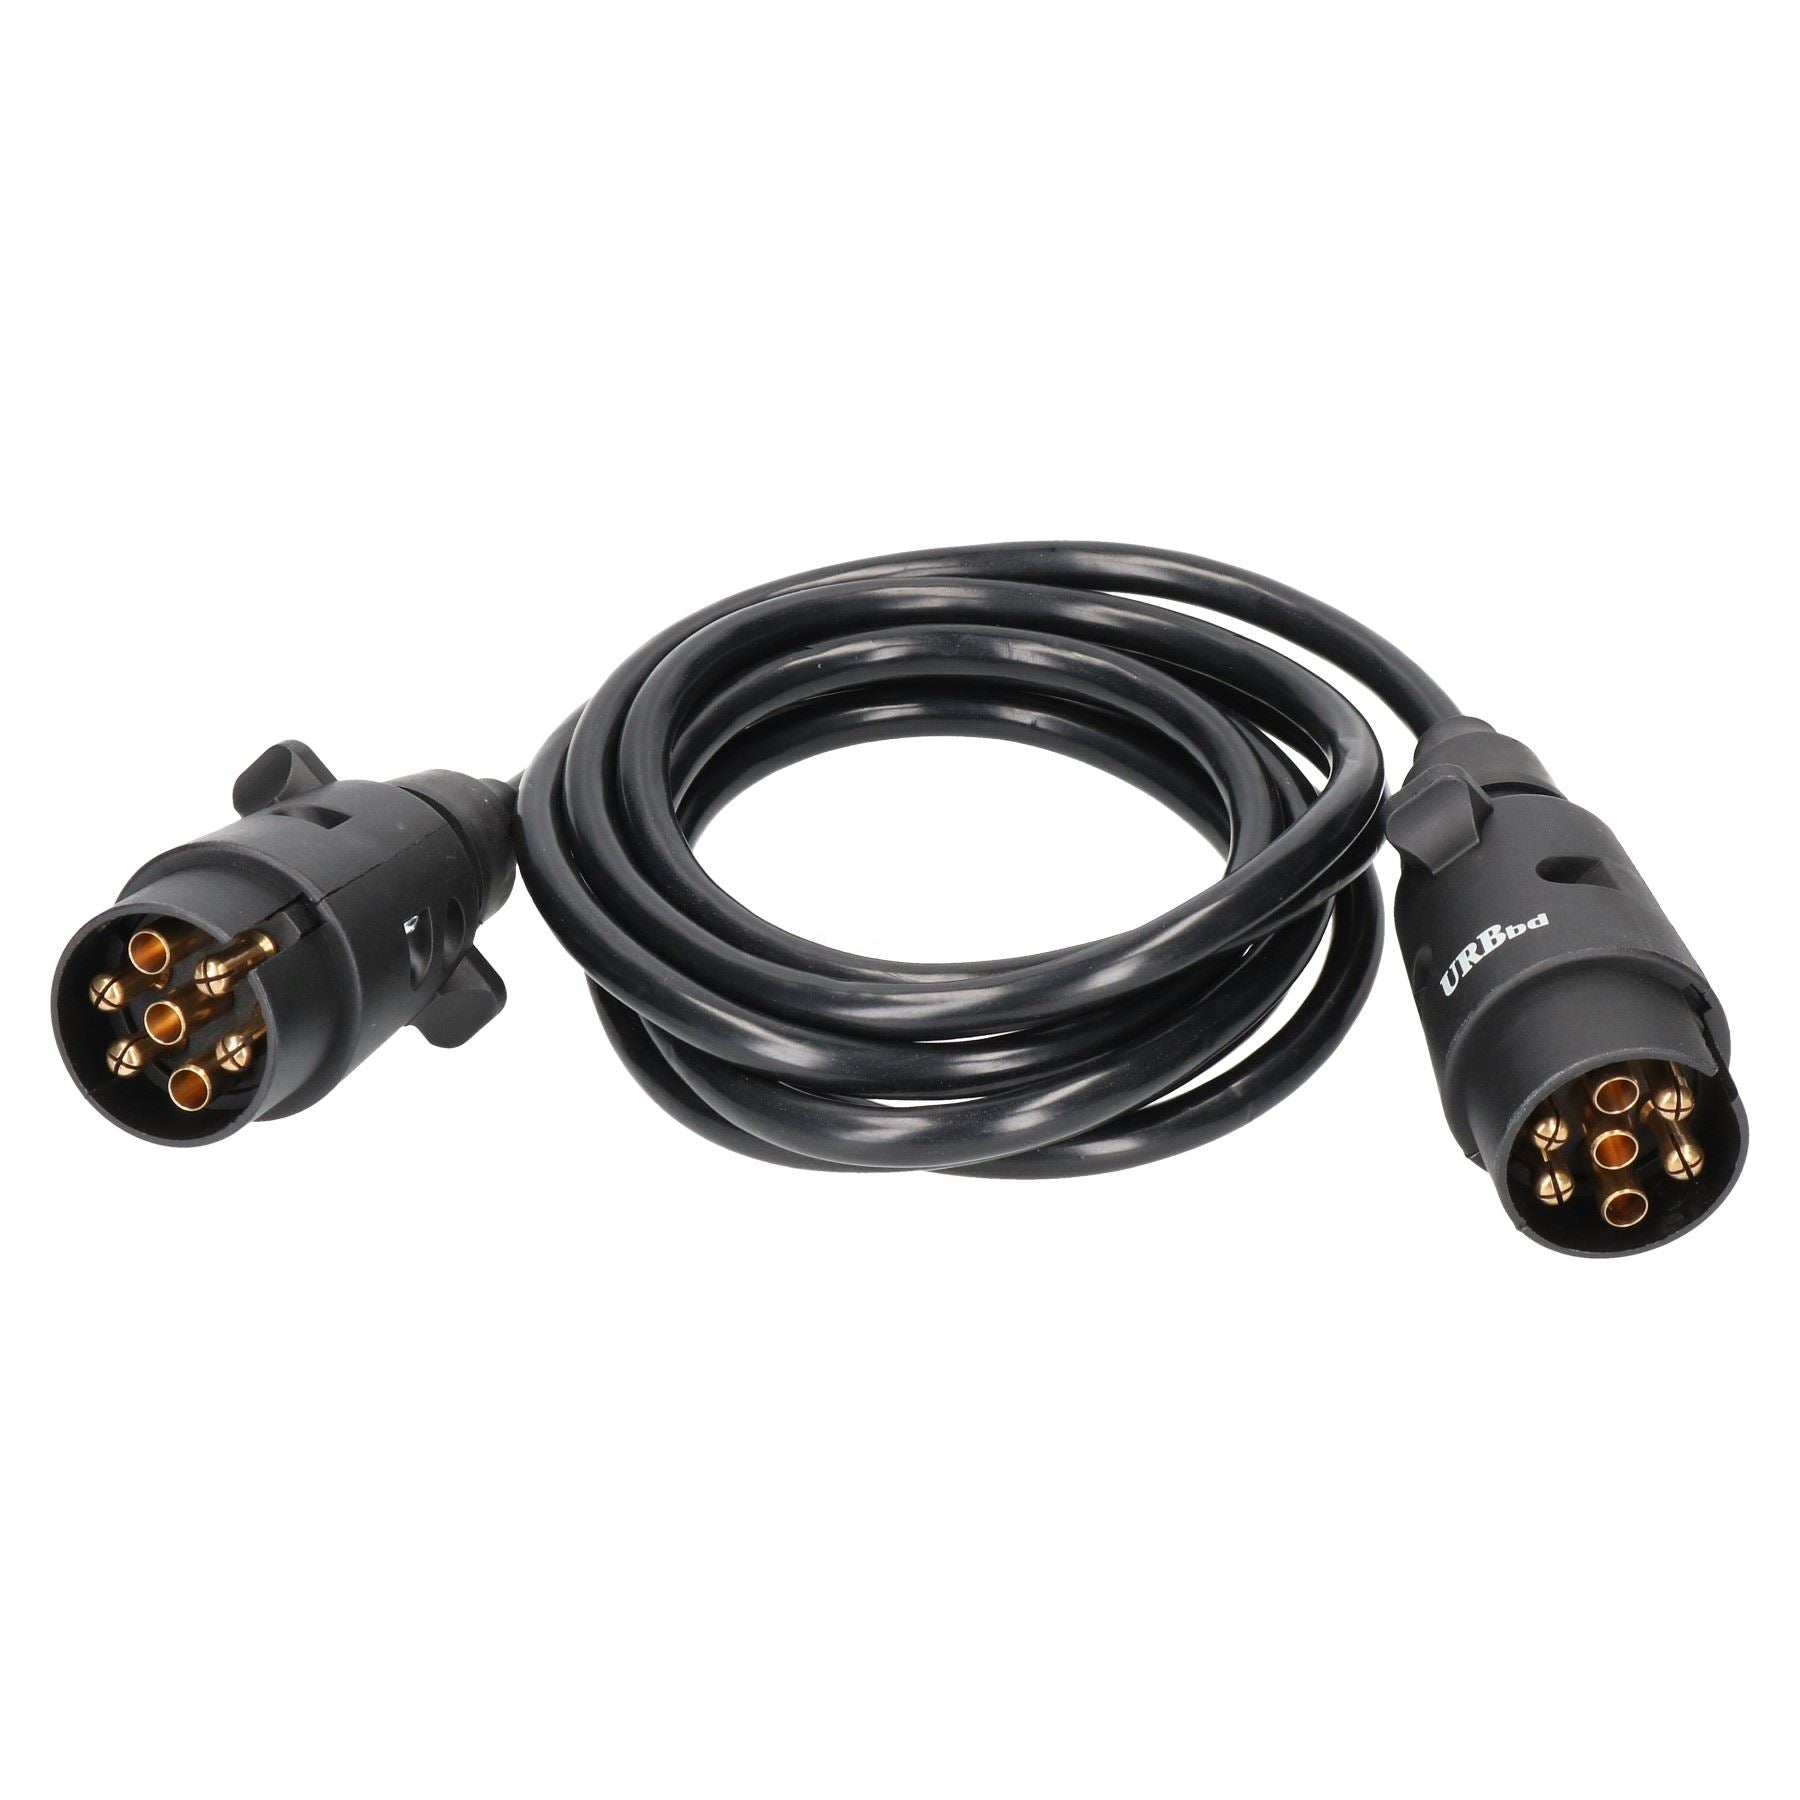 Trailer Light Electrics 1.5m Extension Cable Lead Male to Male 7 Pin Plugs